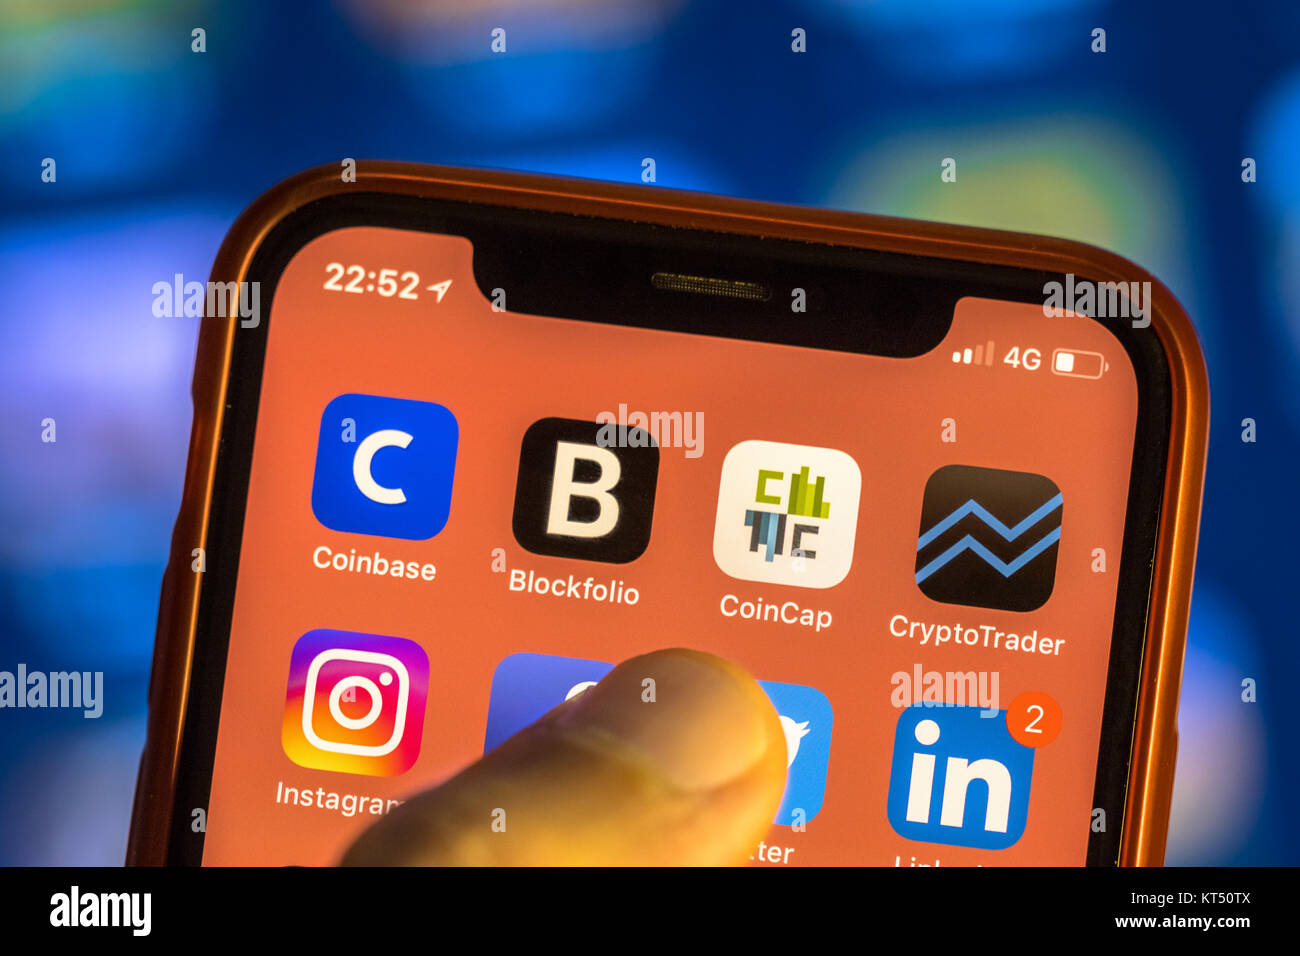 NEW YORK, USA - NOVEMBER 7, 2017: Crypto currency app icons on new smartphone display close-up around other social media iphone applications Stock Photo